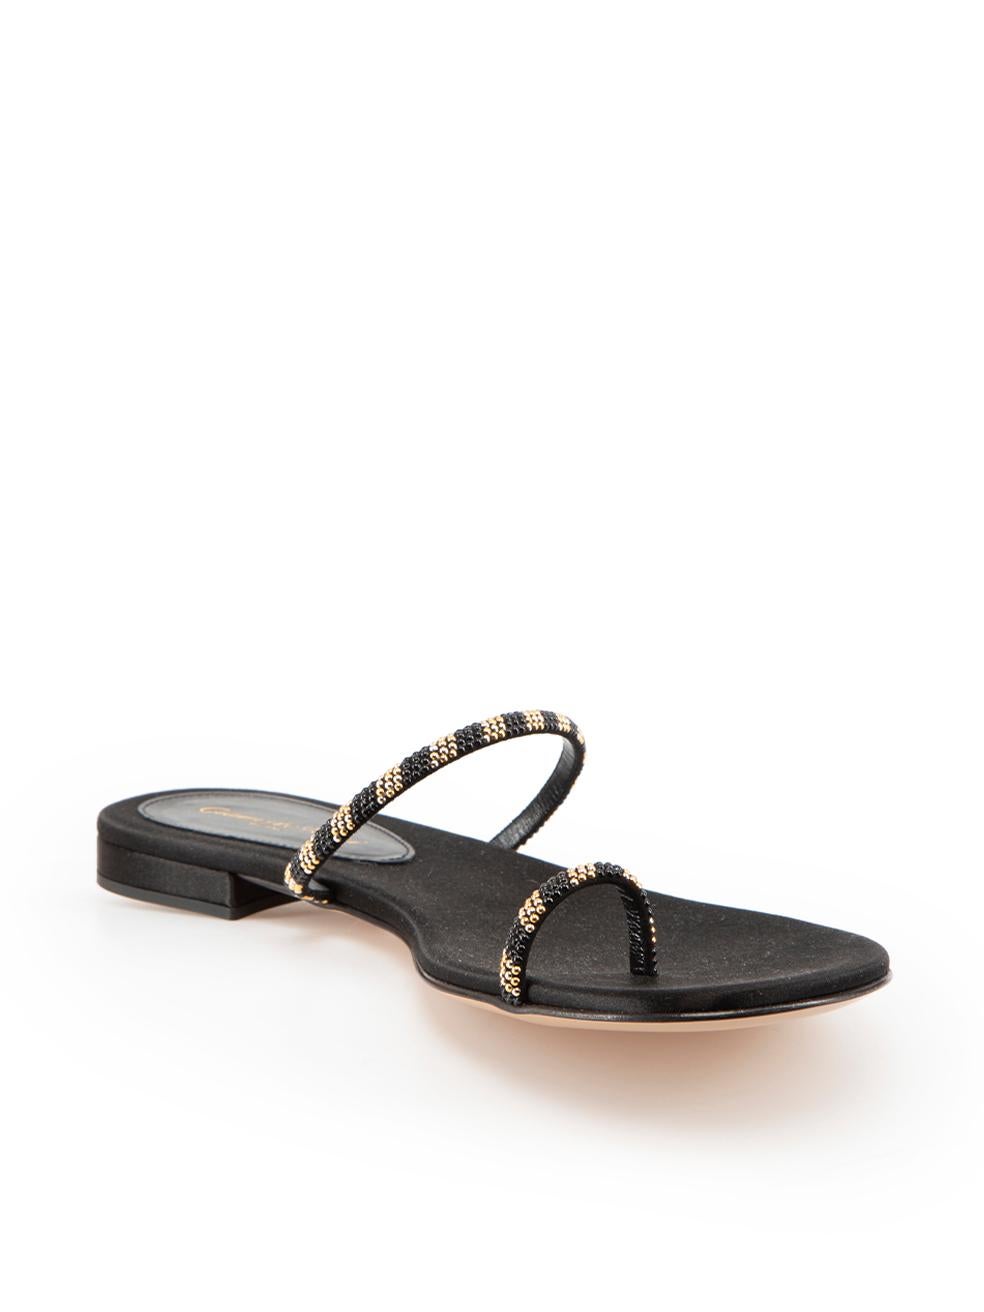 CONDITION is Never worn. No visible wear to sandals is evident on this new Gianvito Rossi designer resale item. Comes in original box.

Details
Black
Embellished suede
Thong sandals
Gold and black embellishment
Strappy
Flat

Made in